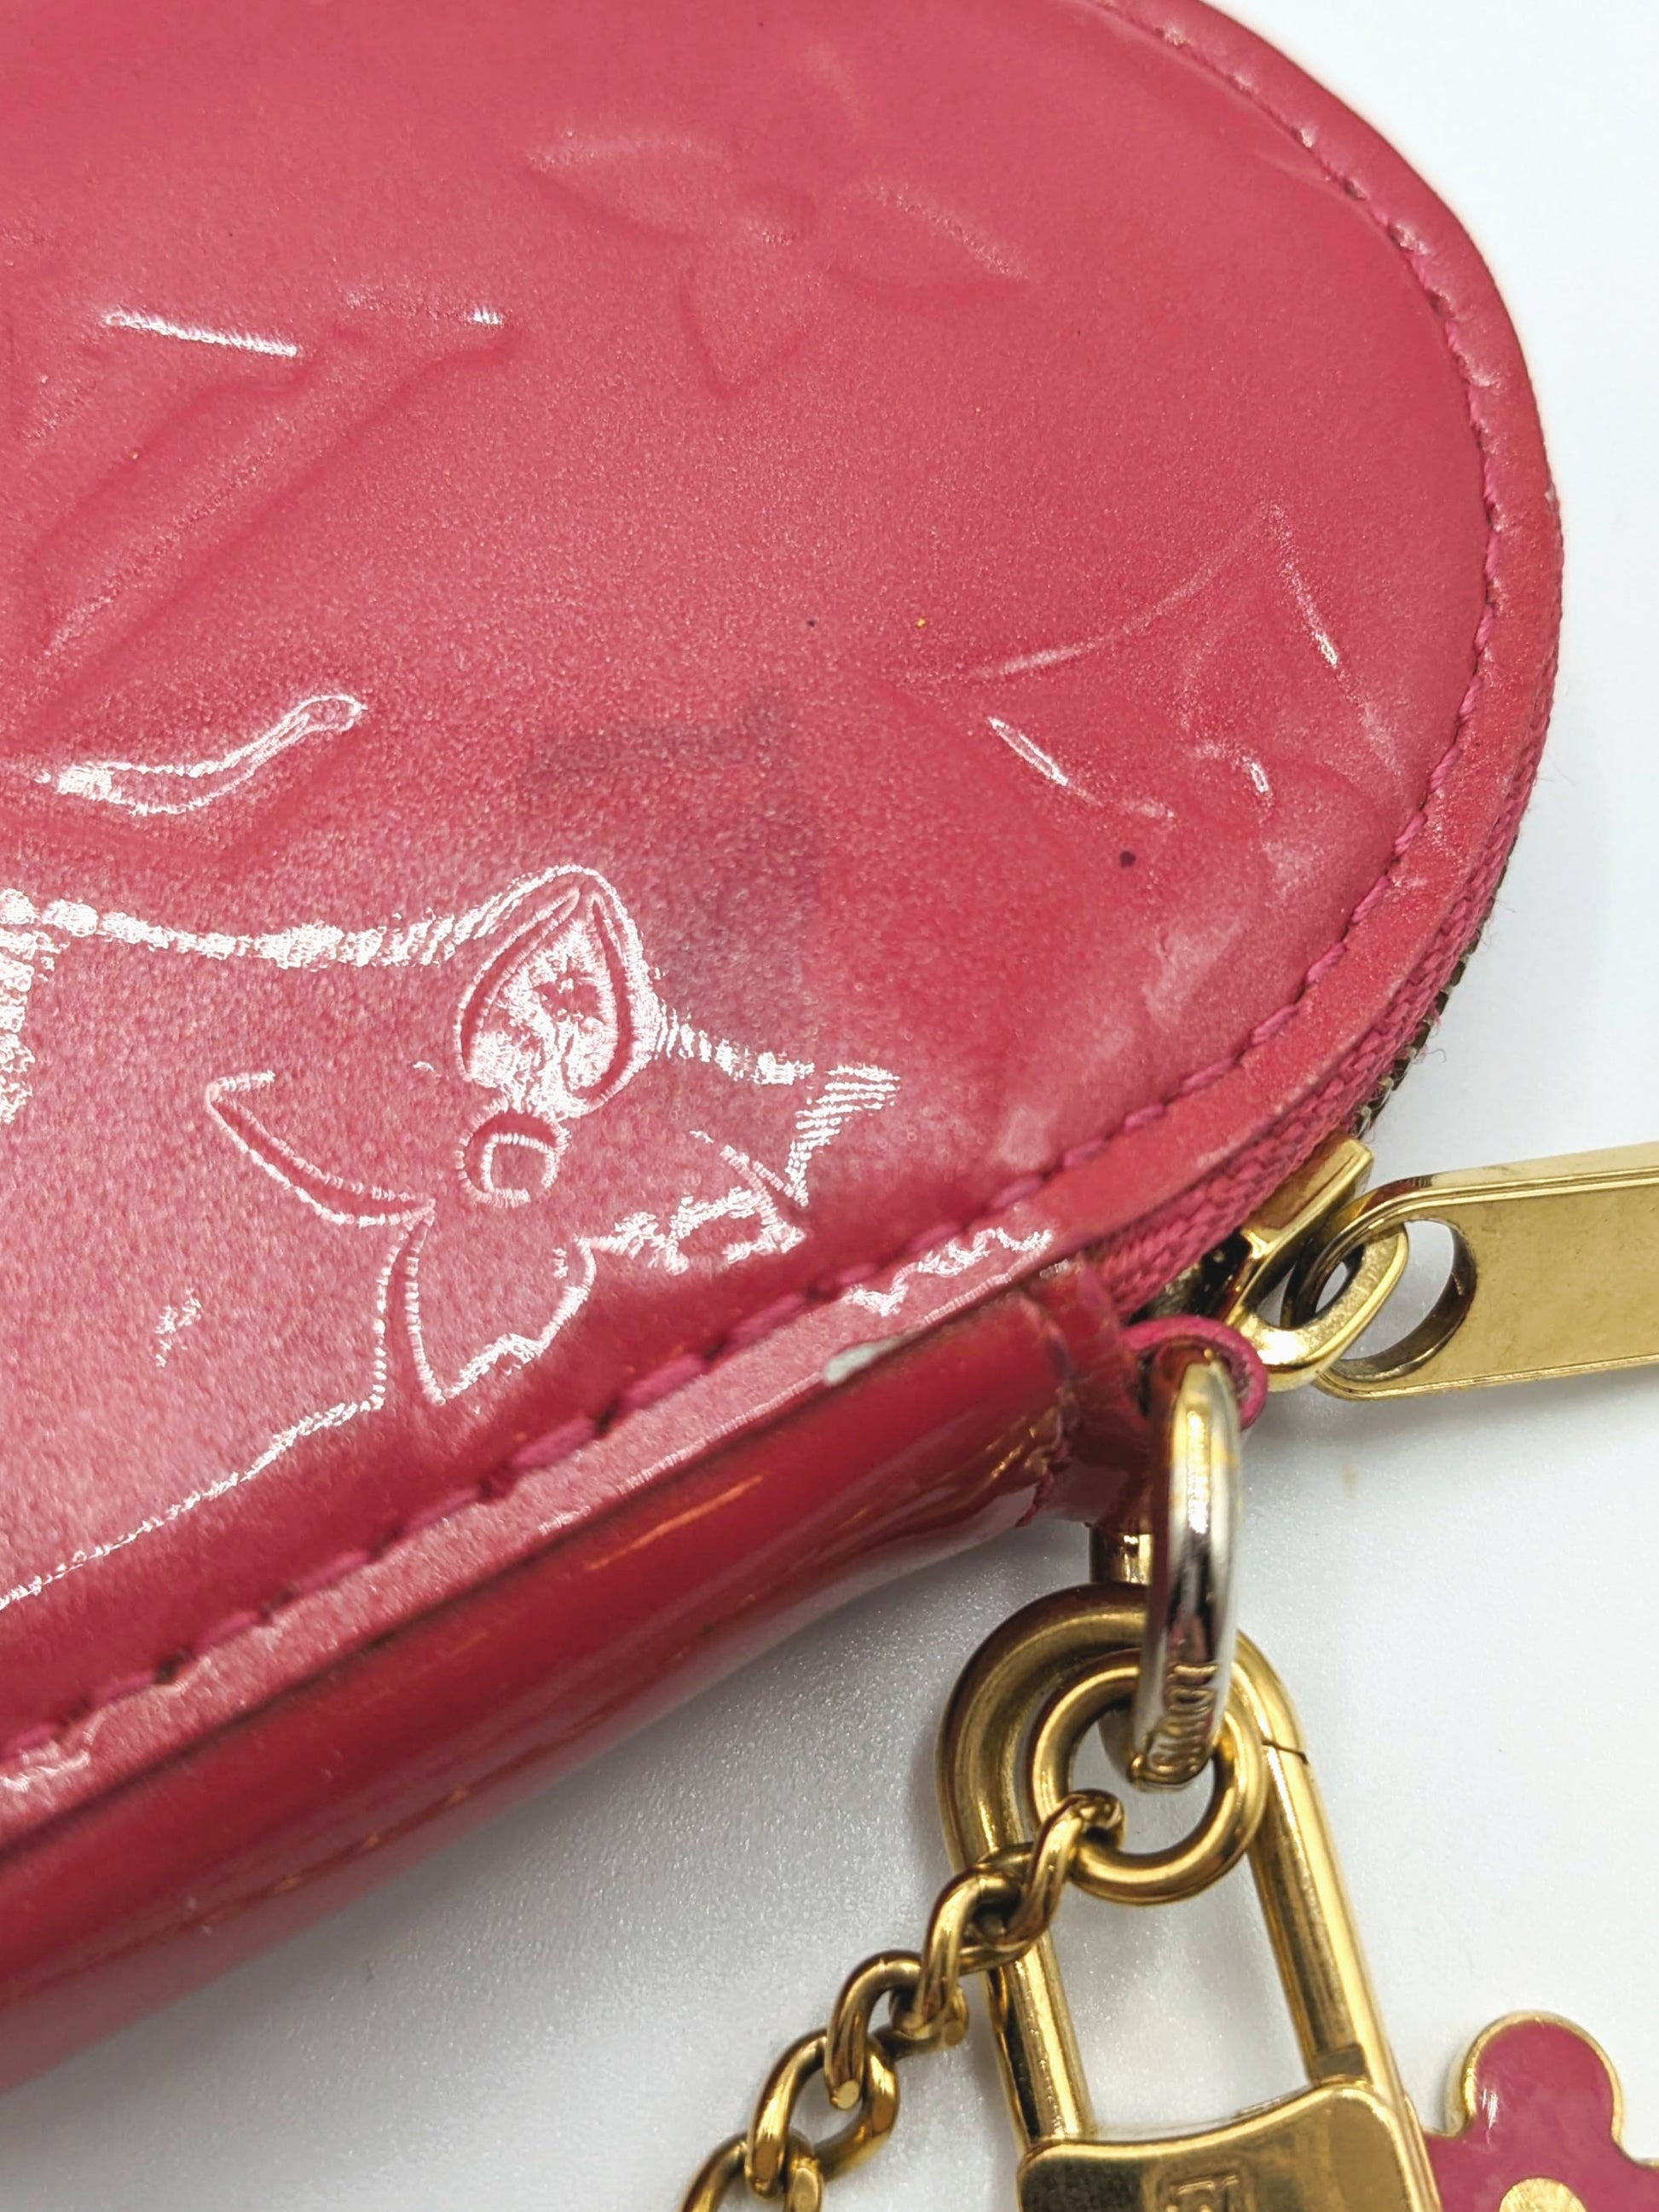 What Goes Around Comes Around Louis Vuitton Purple Vernis Heart Coin Purse